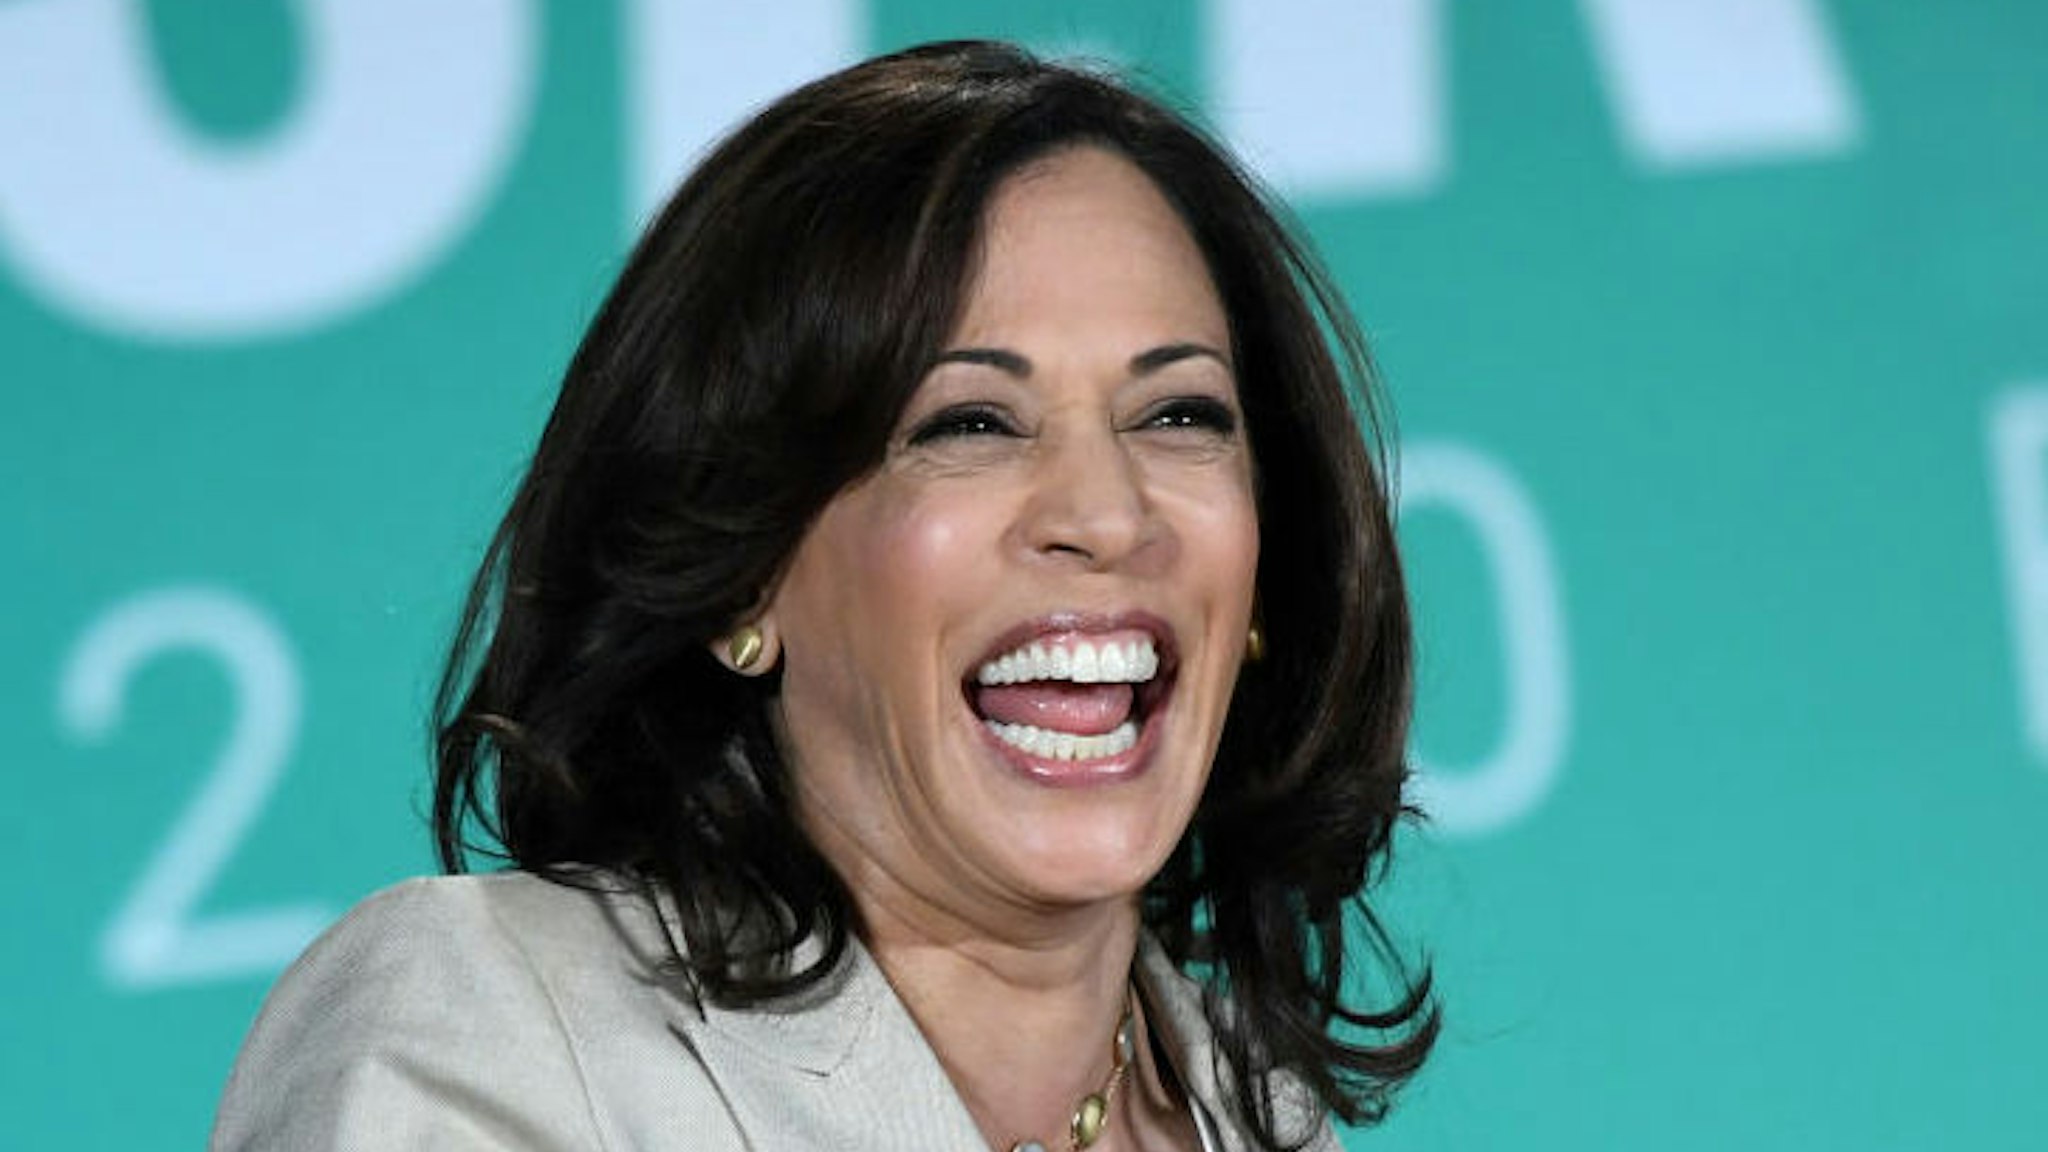 Democratic presidential candidate and U.S. Sen. Kamala Harris (D-CA) speaks during the 2020 Public Service Forum hosted by the American Federation of State, County and Municipal Employees (AFSCME) at UNLV on August 3, 2019 in Las Vegas, Nevada.